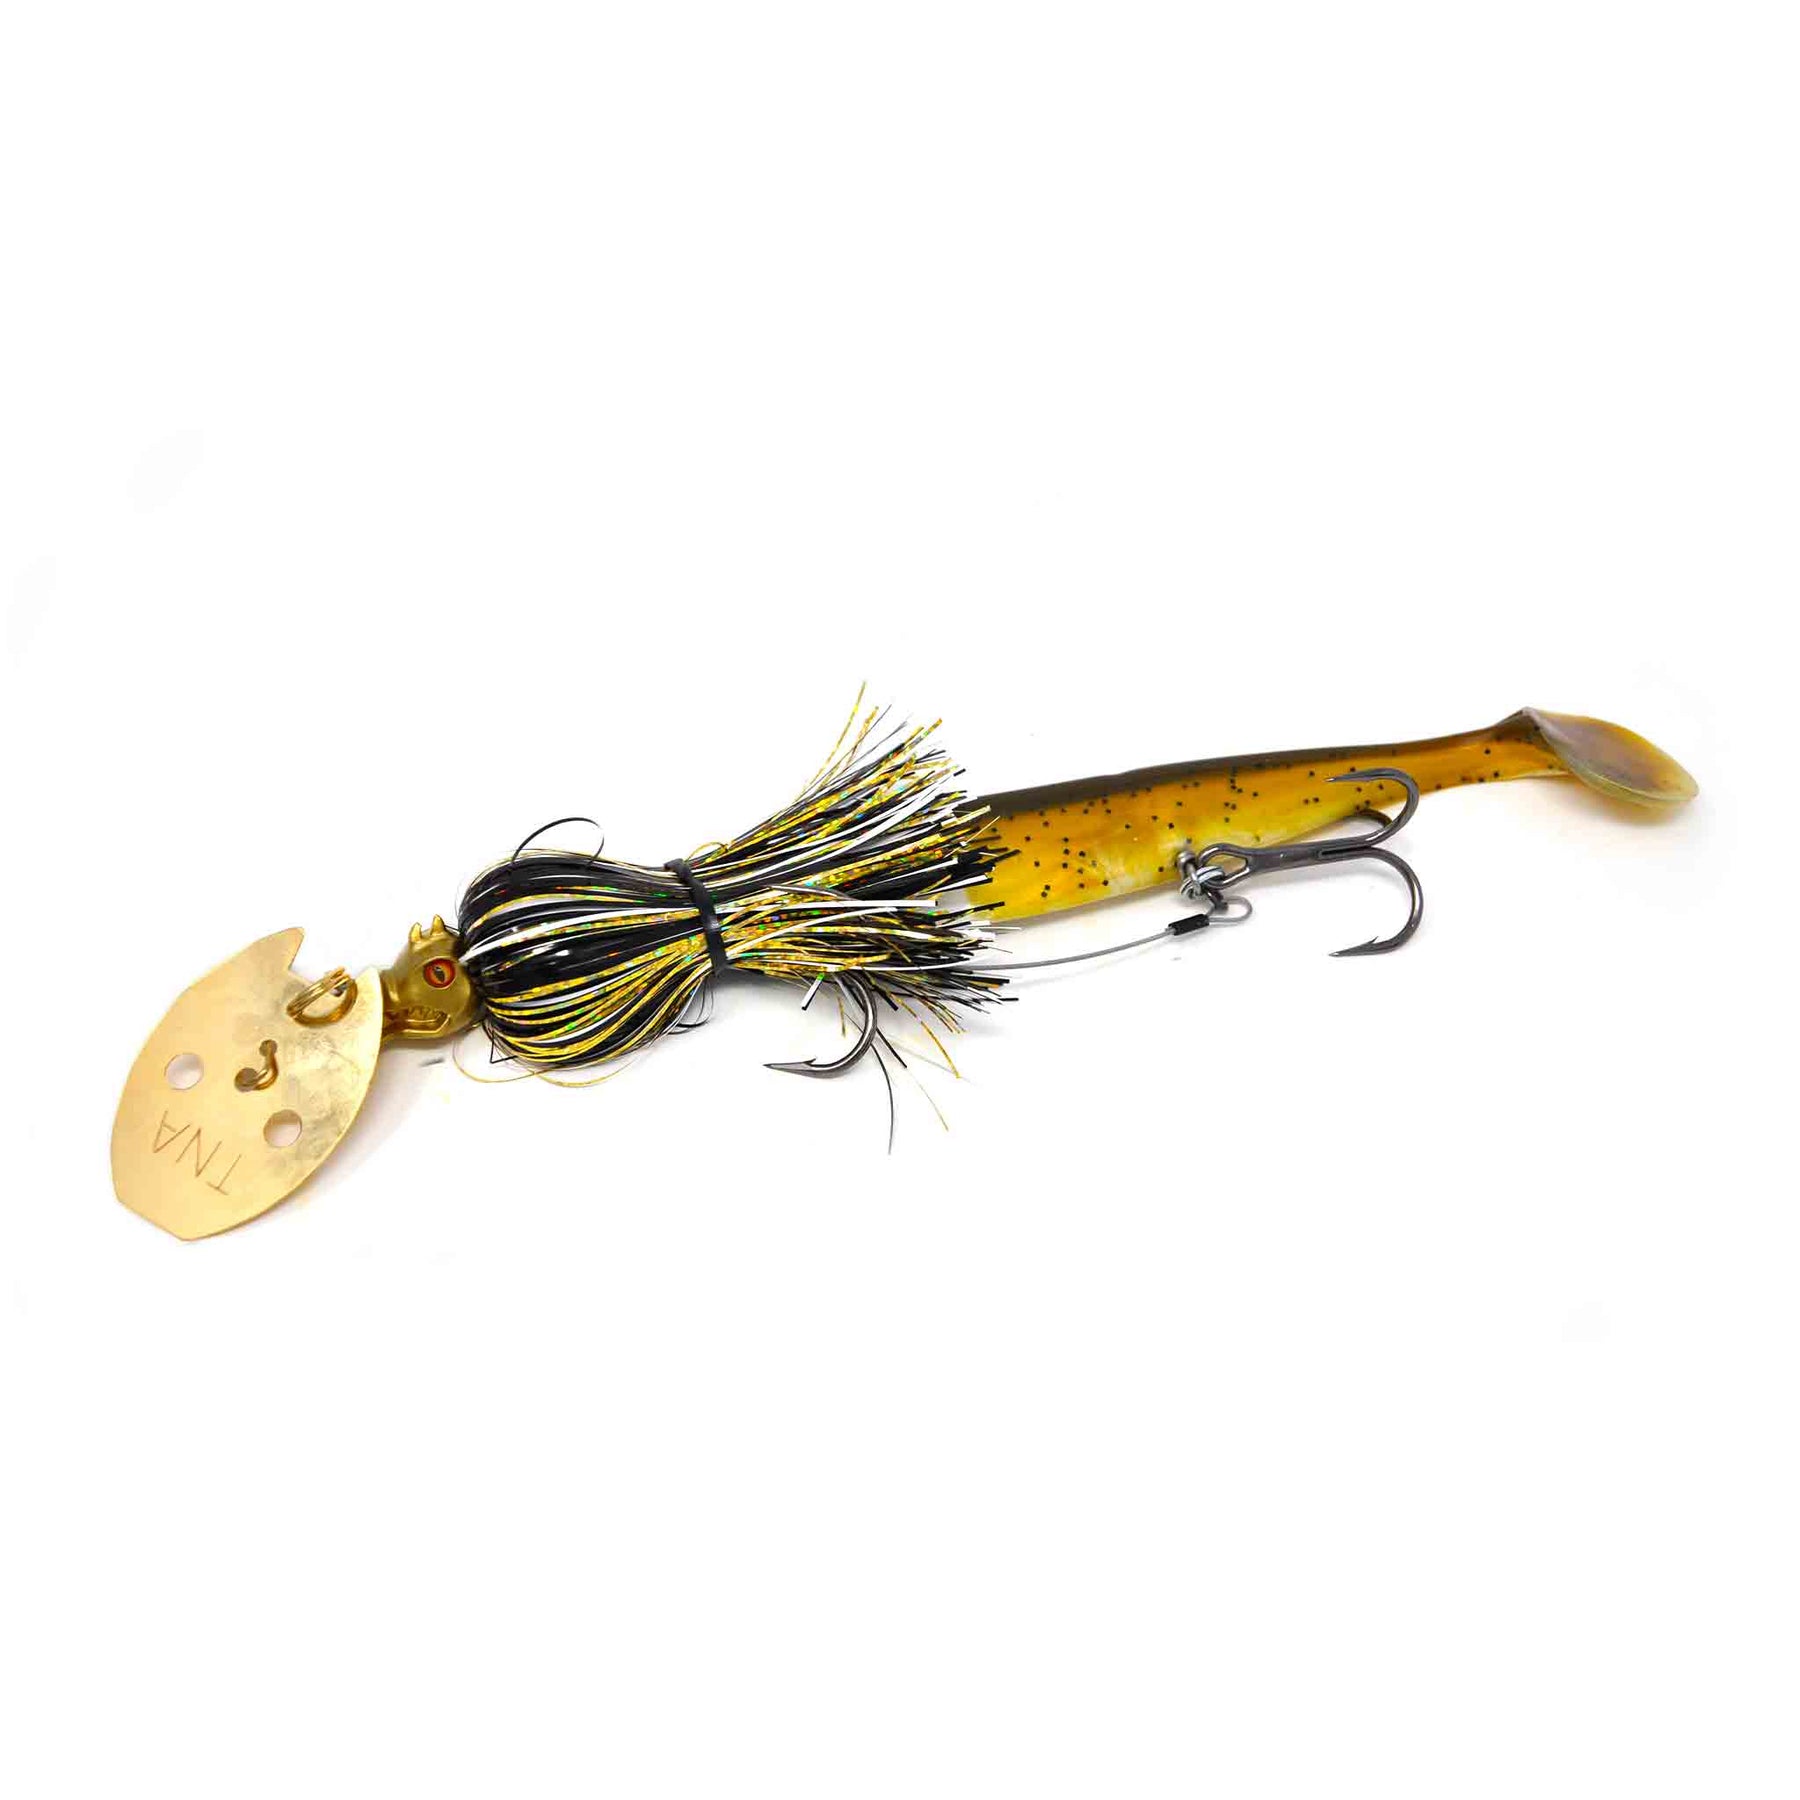 View of Chatterbaits TnA Tackle Waggin Dragon Chatterbait Cleopatra available at EZOKO Pike and Musky Shop